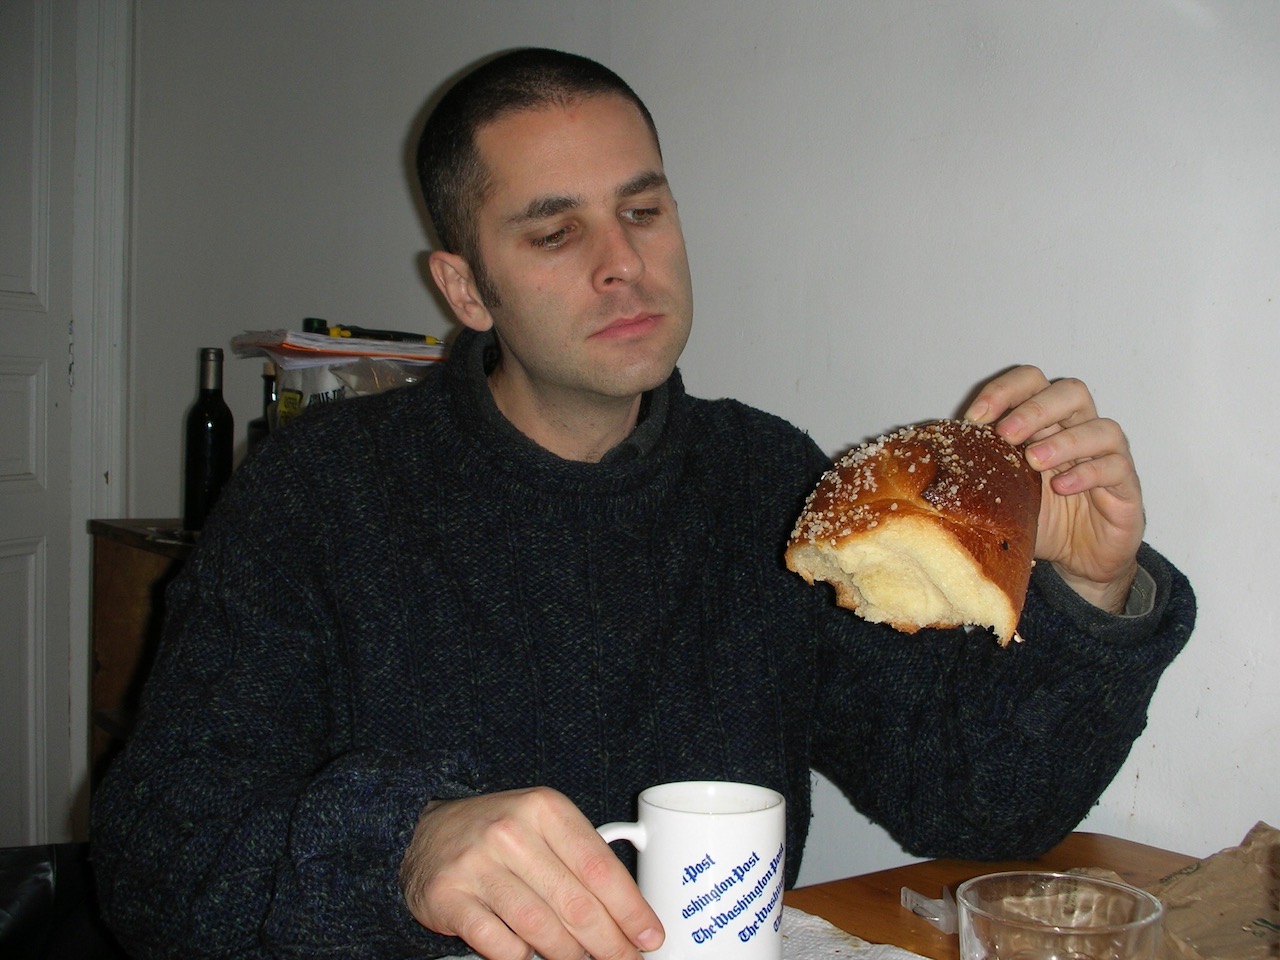 The author in Paris in 2008, thinking small thoughts with a big brioche